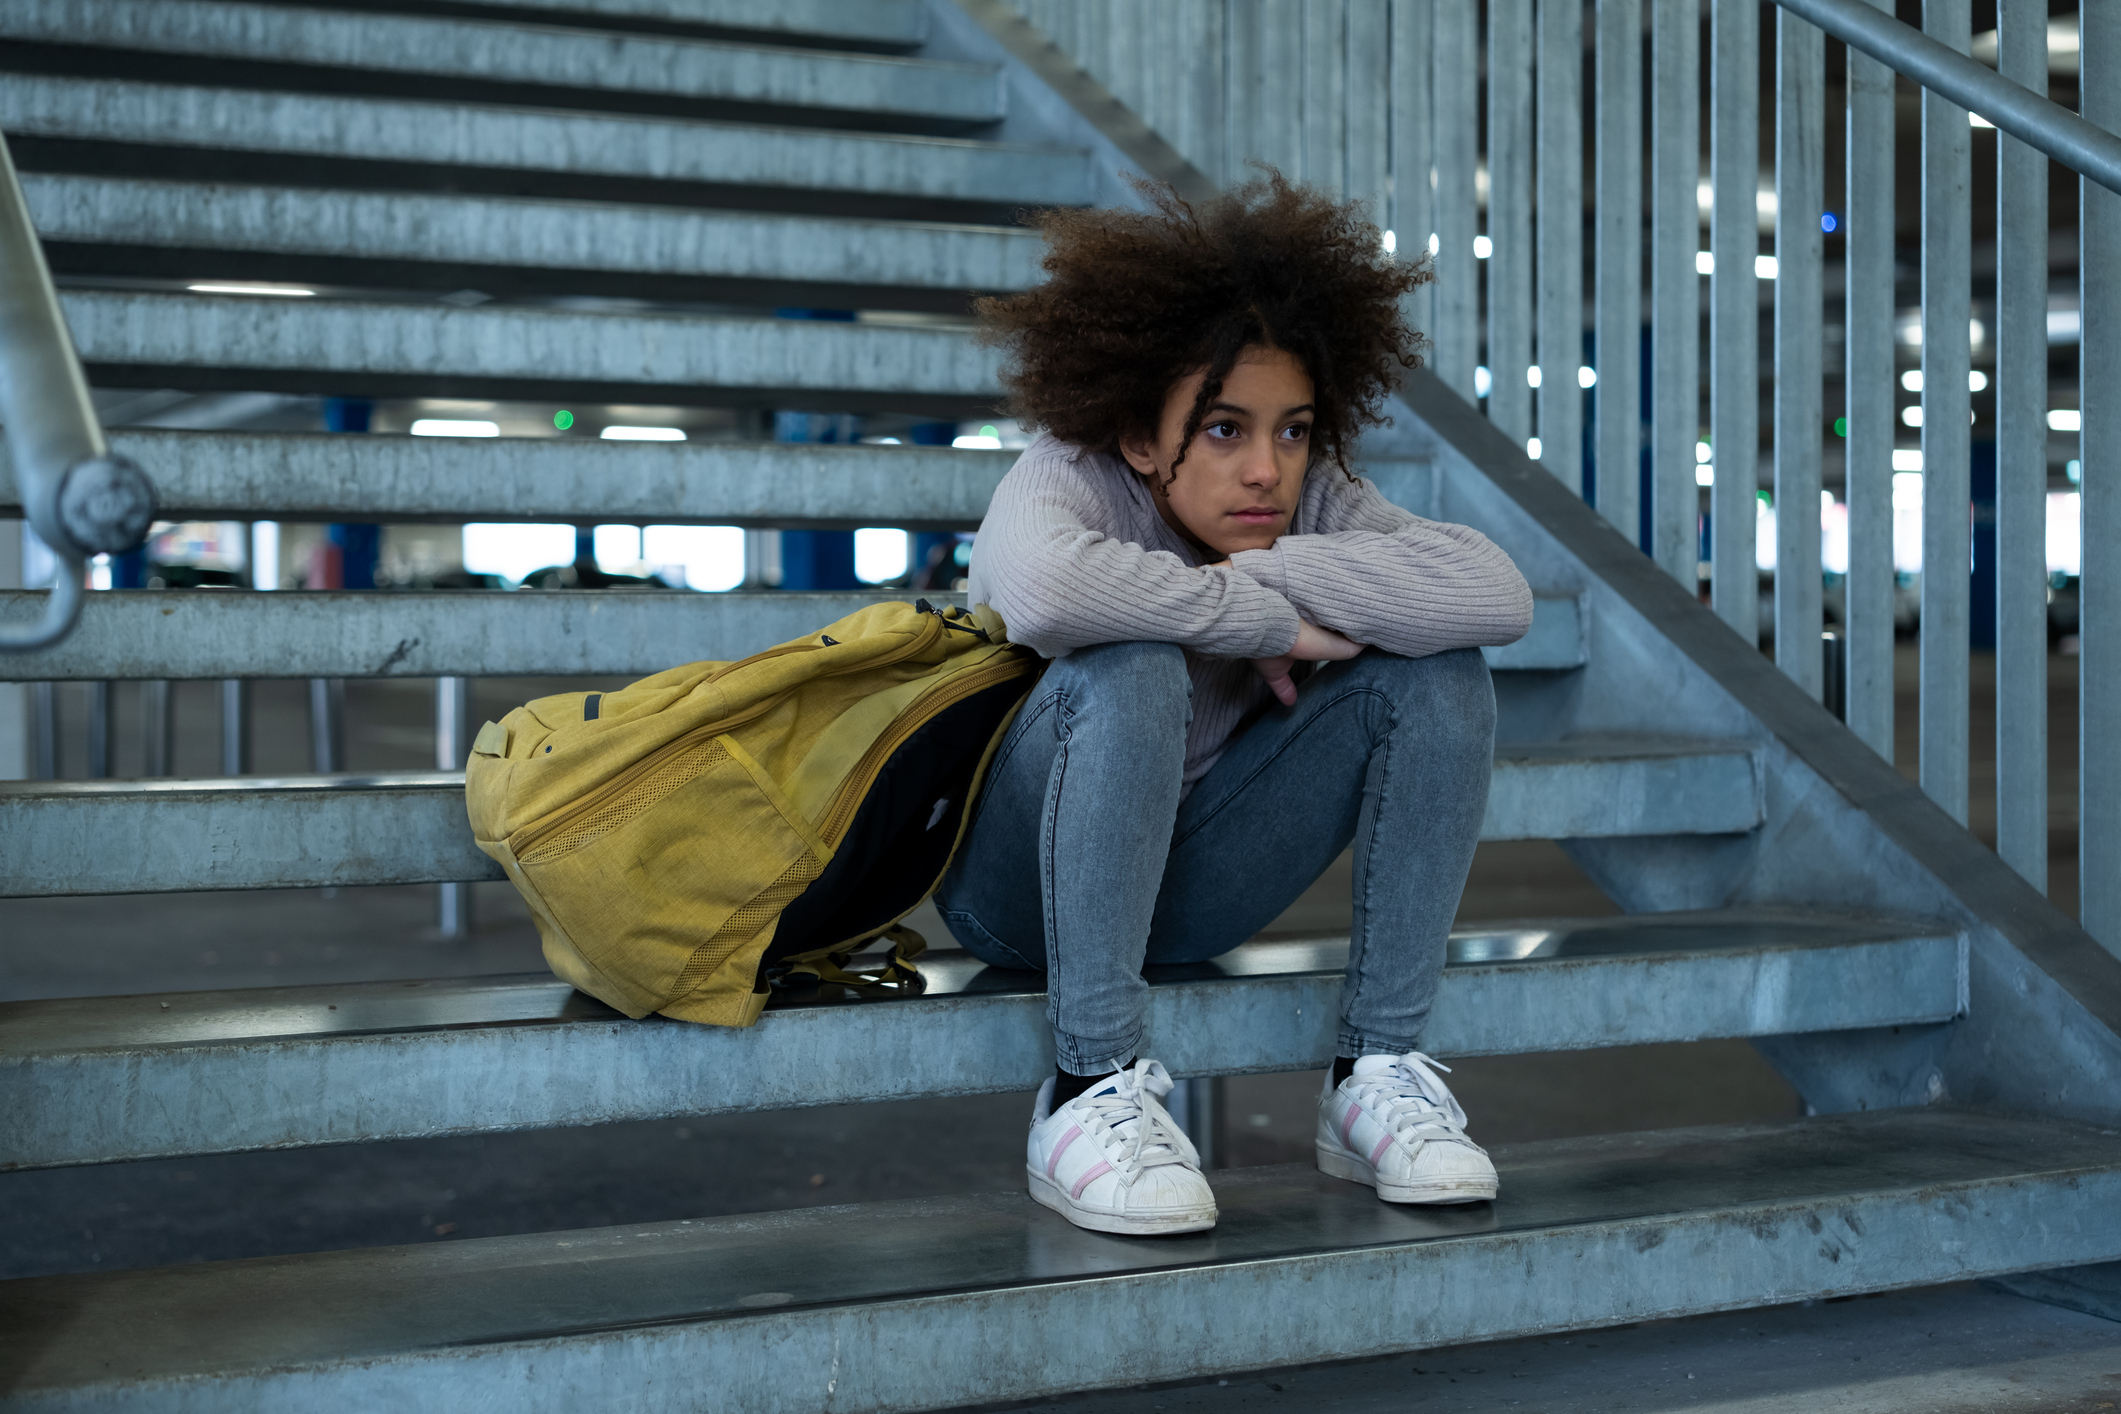 Person sitting on a stairway with a yellow backpack beside them, looking thoughtful and distant